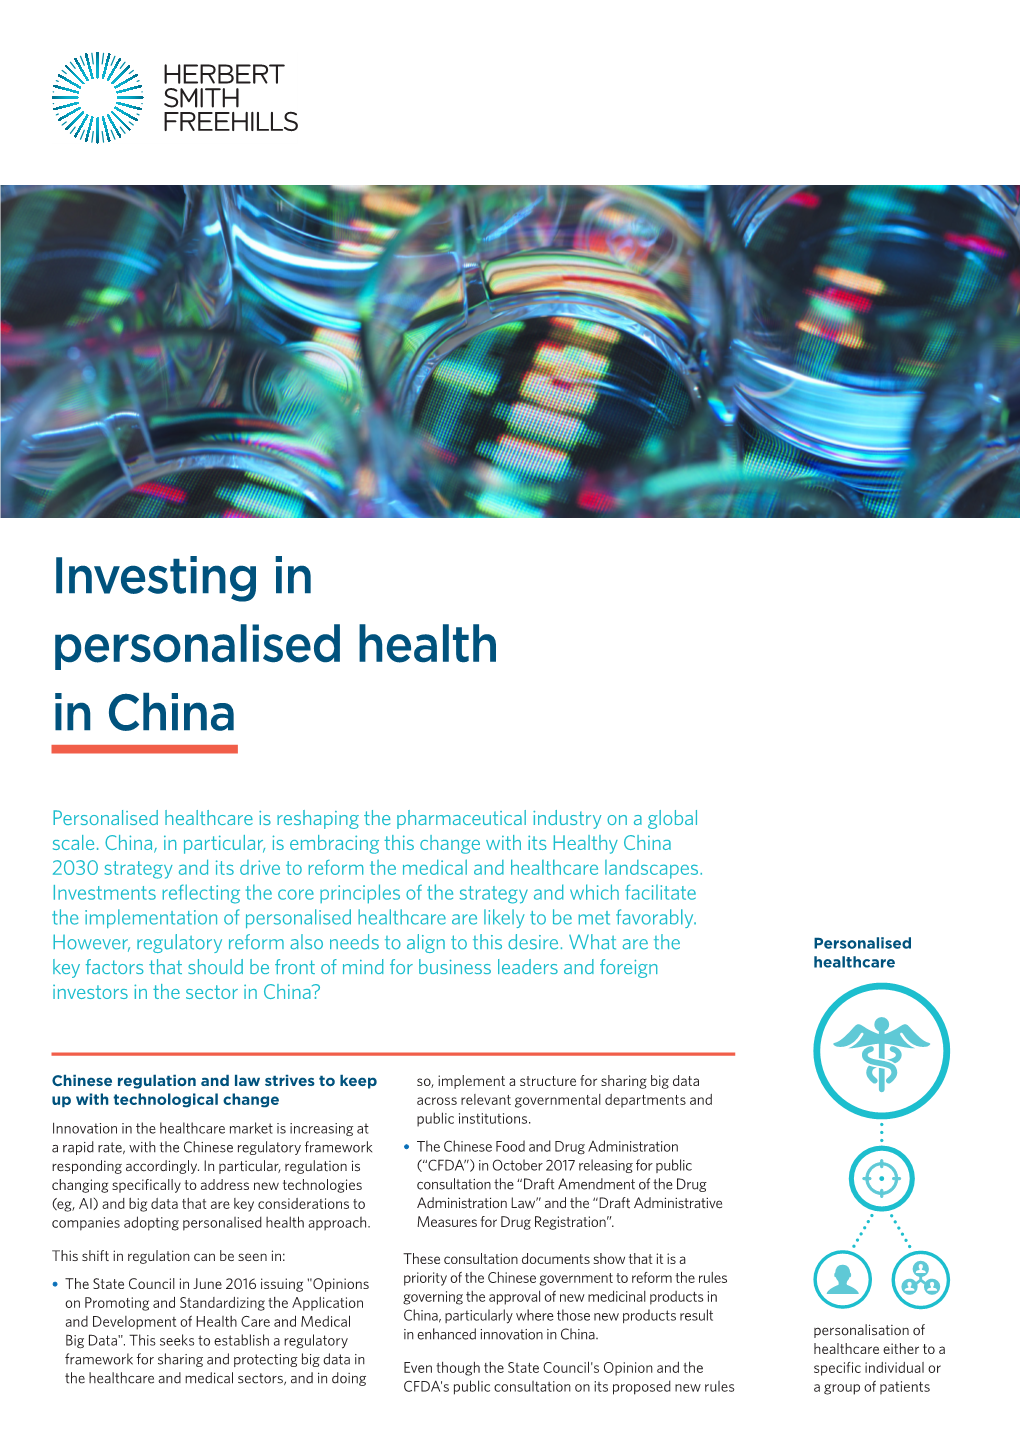 Investing in Personalised Health in China